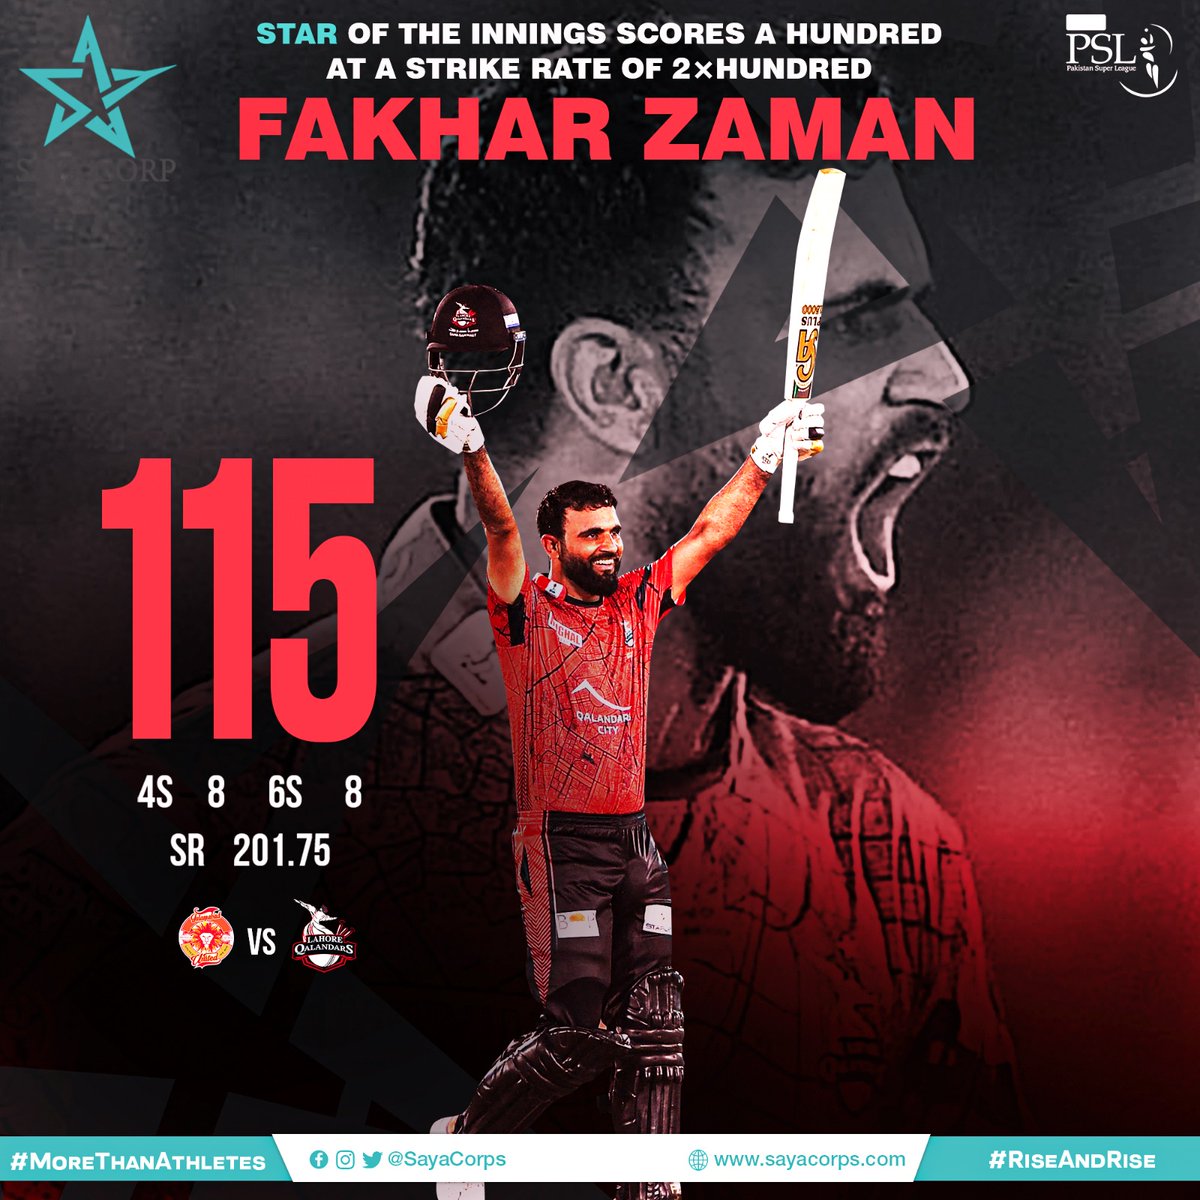 The man, the myth, the legend - @FakharZamanLive Left handed opening batter was in his full flow tonight to notch up his 2nd #HBLPSL 💯 He has now scored most 50+ or more scores in the last 2 seasons. The reigning champ. #MoreThanAthletes #RiseAndRise #SayaCorporation